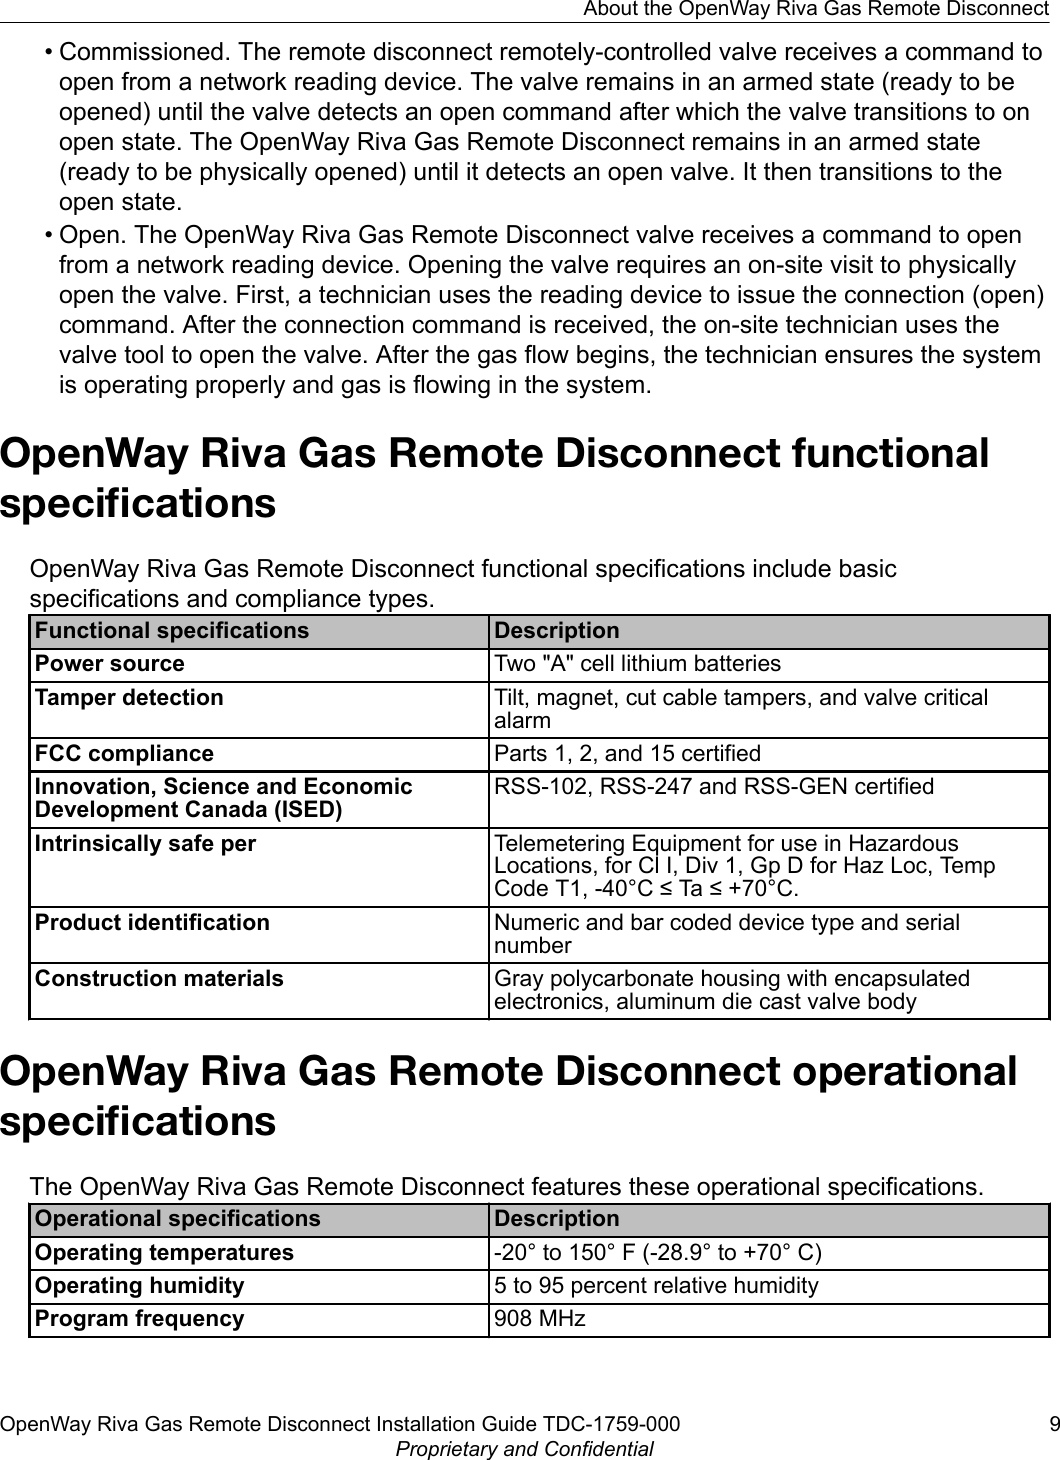 • Commissioned. The remote disconnect remotely-controlled valve receives a command toopen from a network reading device. The valve remains in an armed state (ready to beopened) until the valve detects an open command after which the valve transitions to onopen state. The OpenWay Riva Gas Remote Disconnect remains in an armed state(ready to be physically opened) until it detects an open valve. It then transitions to theopen state.• Open. The OpenWay Riva Gas Remote Disconnect valve receives a command to openfrom a network reading device. Opening the valve requires an on-site visit to physicallyopen the valve. First, a technician uses the reading device to issue the connection (open)command. After the connection command is received, the on-site technician uses thevalve tool to open the valve. After the gas flow begins, the technician ensures the systemis operating properly and gas is flowing in the system.OpenWay Riva Gas Remote Disconnect functionalspeciﬁcationsOpenWay Riva Gas Remote Disconnect functional specifications include basicspecifications and compliance types.Functional specifications DescriptionPower source Two &quot;A&quot; cell lithium batteriesTamper detection Tilt, magnet, cut cable tampers, and valve criticalalarmFCC compliance Parts 1, 2, and 15 certifiedInnovation, Science and EconomicDevelopment Canada (ISED)RSS-102, RSS-247 and RSS-GEN certifiedIntrinsically safe per Telemetering Equipment for use in HazardousLocations, for Cl I, Div 1, Gp D for Haz Loc, TempCode T1, -40°C ≤ Ta ≤ +70°C.Product identification Numeric and bar coded device type and serialnumberConstruction materials Gray polycarbonate housing with encapsulatedelectronics, aluminum die cast valve bodyOpenWay Riva Gas Remote Disconnect operationalspeciﬁcationsThe OpenWay Riva Gas Remote Disconnect features these operational specifications.Operational specifications DescriptionOperating temperatures -20° to 150° F (-28.9° to +70° C)Operating humidity 5 to 95 percent relative humidityProgram frequency 908 MHzAbout the OpenWay Riva Gas Remote DisconnectOpenWay Riva Gas Remote Disconnect Installation Guide TDC-1759-000 9Proprietary and Confidential